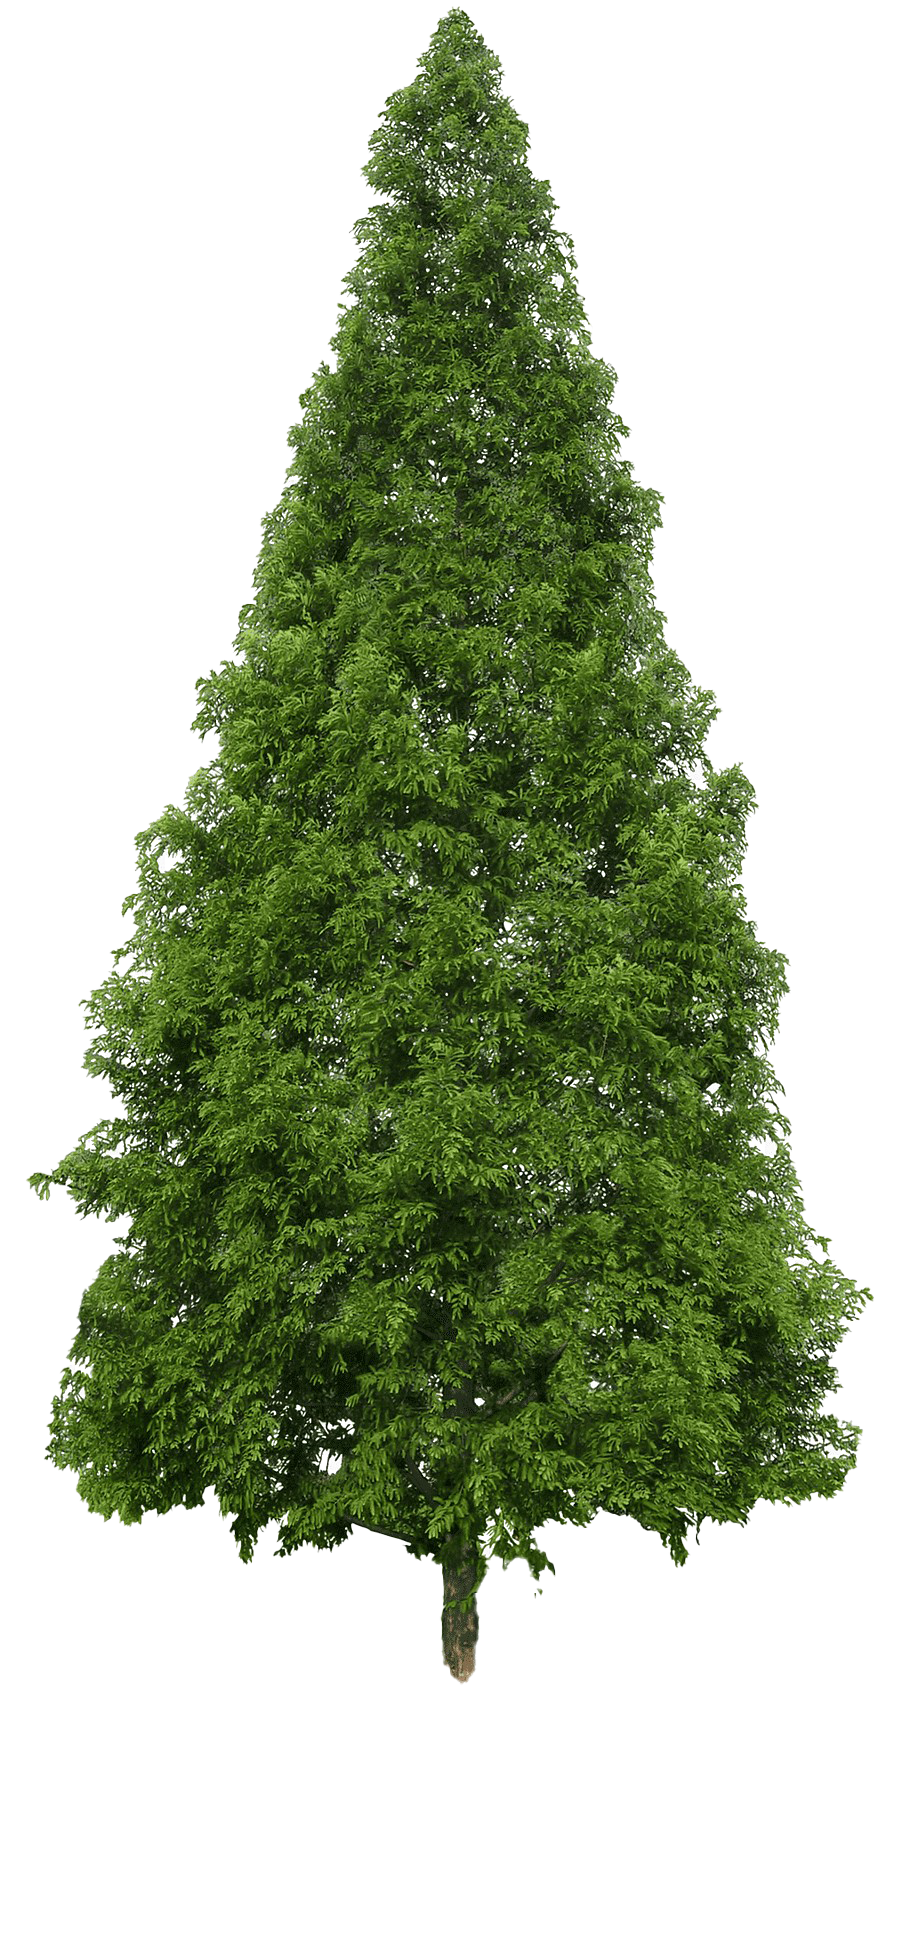 Download PNG image - Evergreen PNG Image 